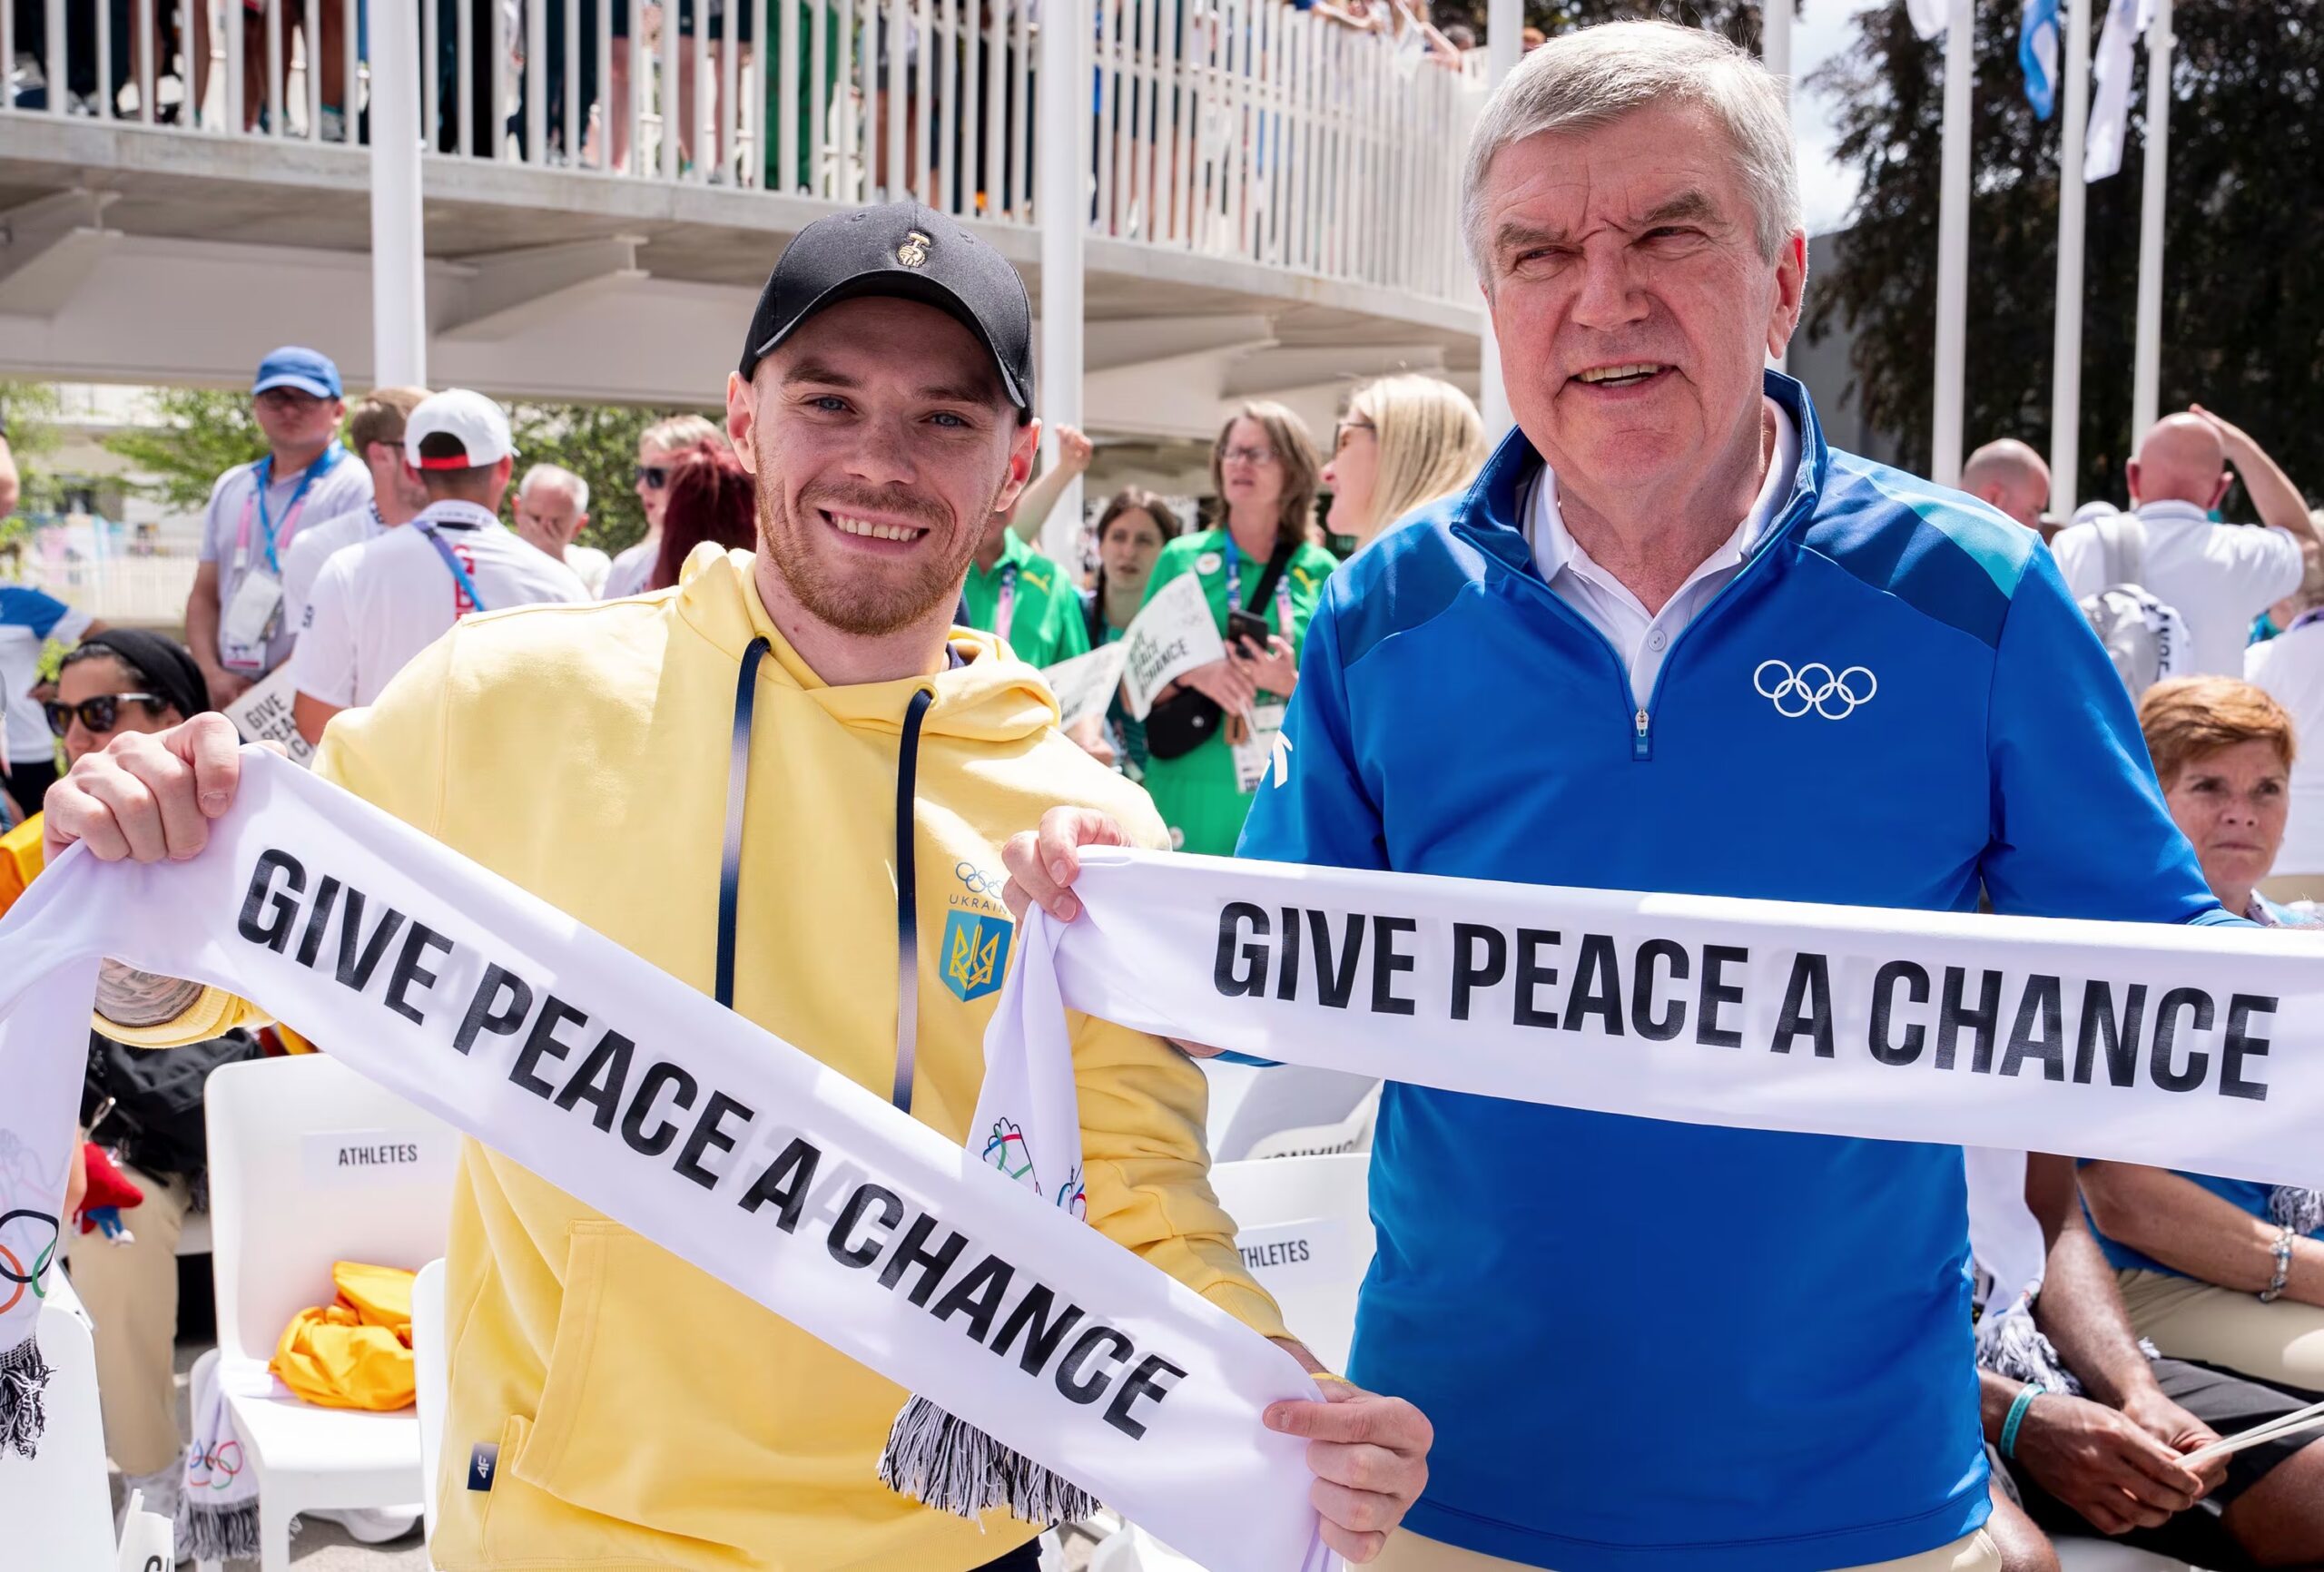 CHAIRMAN OF THE IOC: “YOU ARE THE AMBASSADORS OF OUR TIME”.